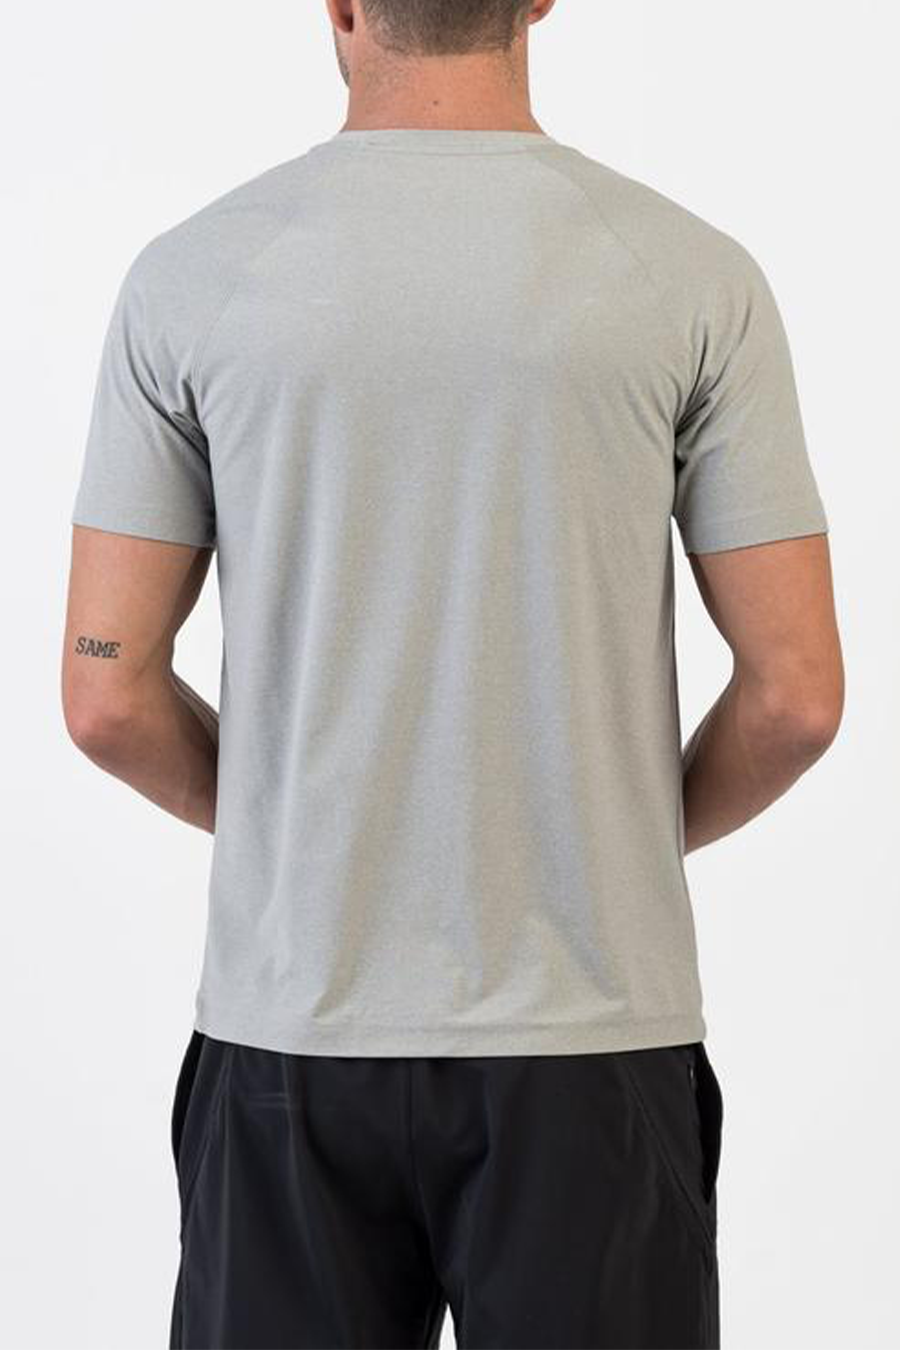 Reign Short Sleeve | Light Heather Gray - Main Image Number 2 of 3